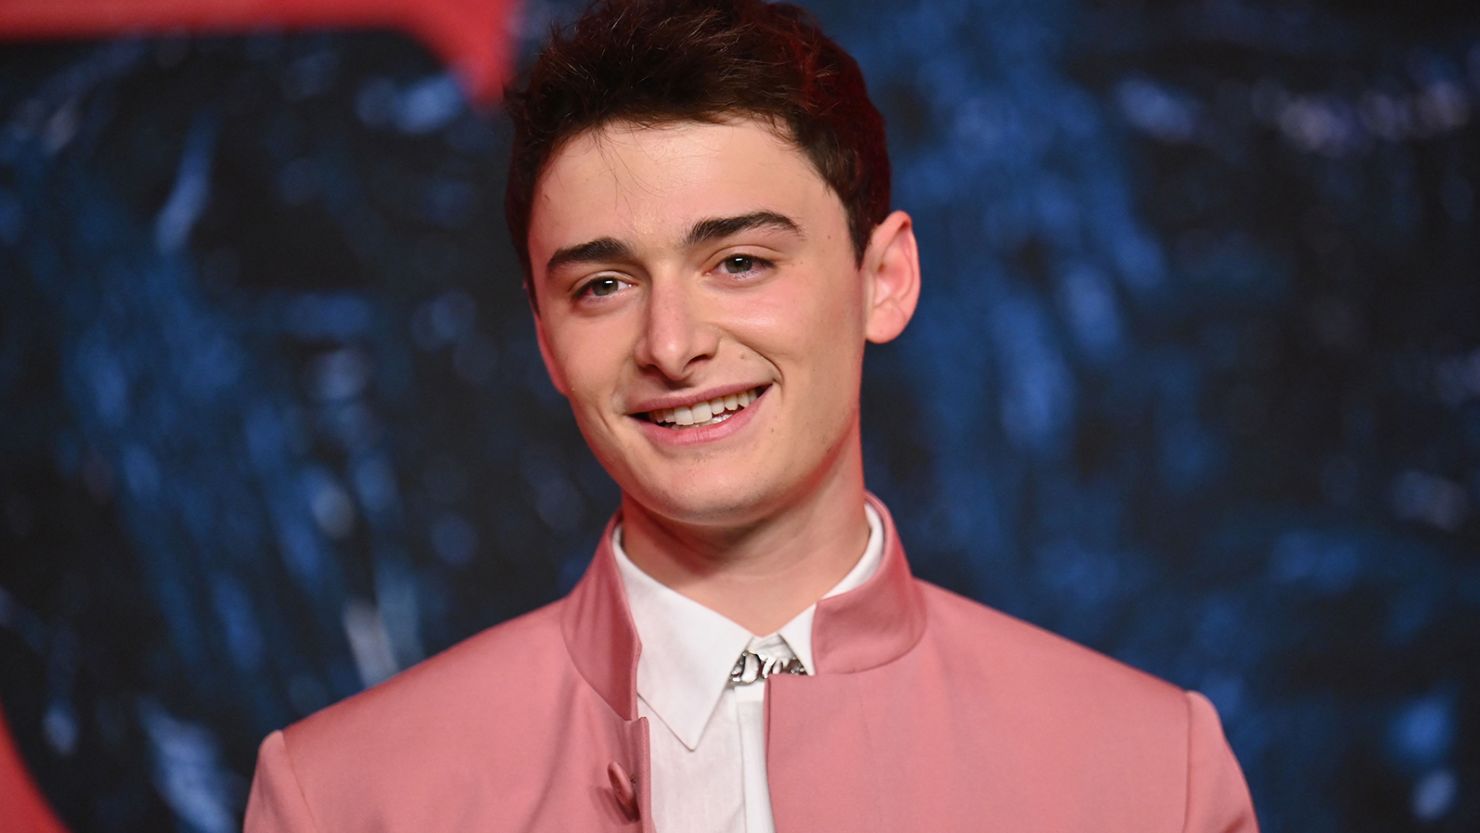 Noah Schnapp, seen here last May for the 'Stranger Things' Season 4 premiere in New York City, has shared some personal details on a recent TikTok video.